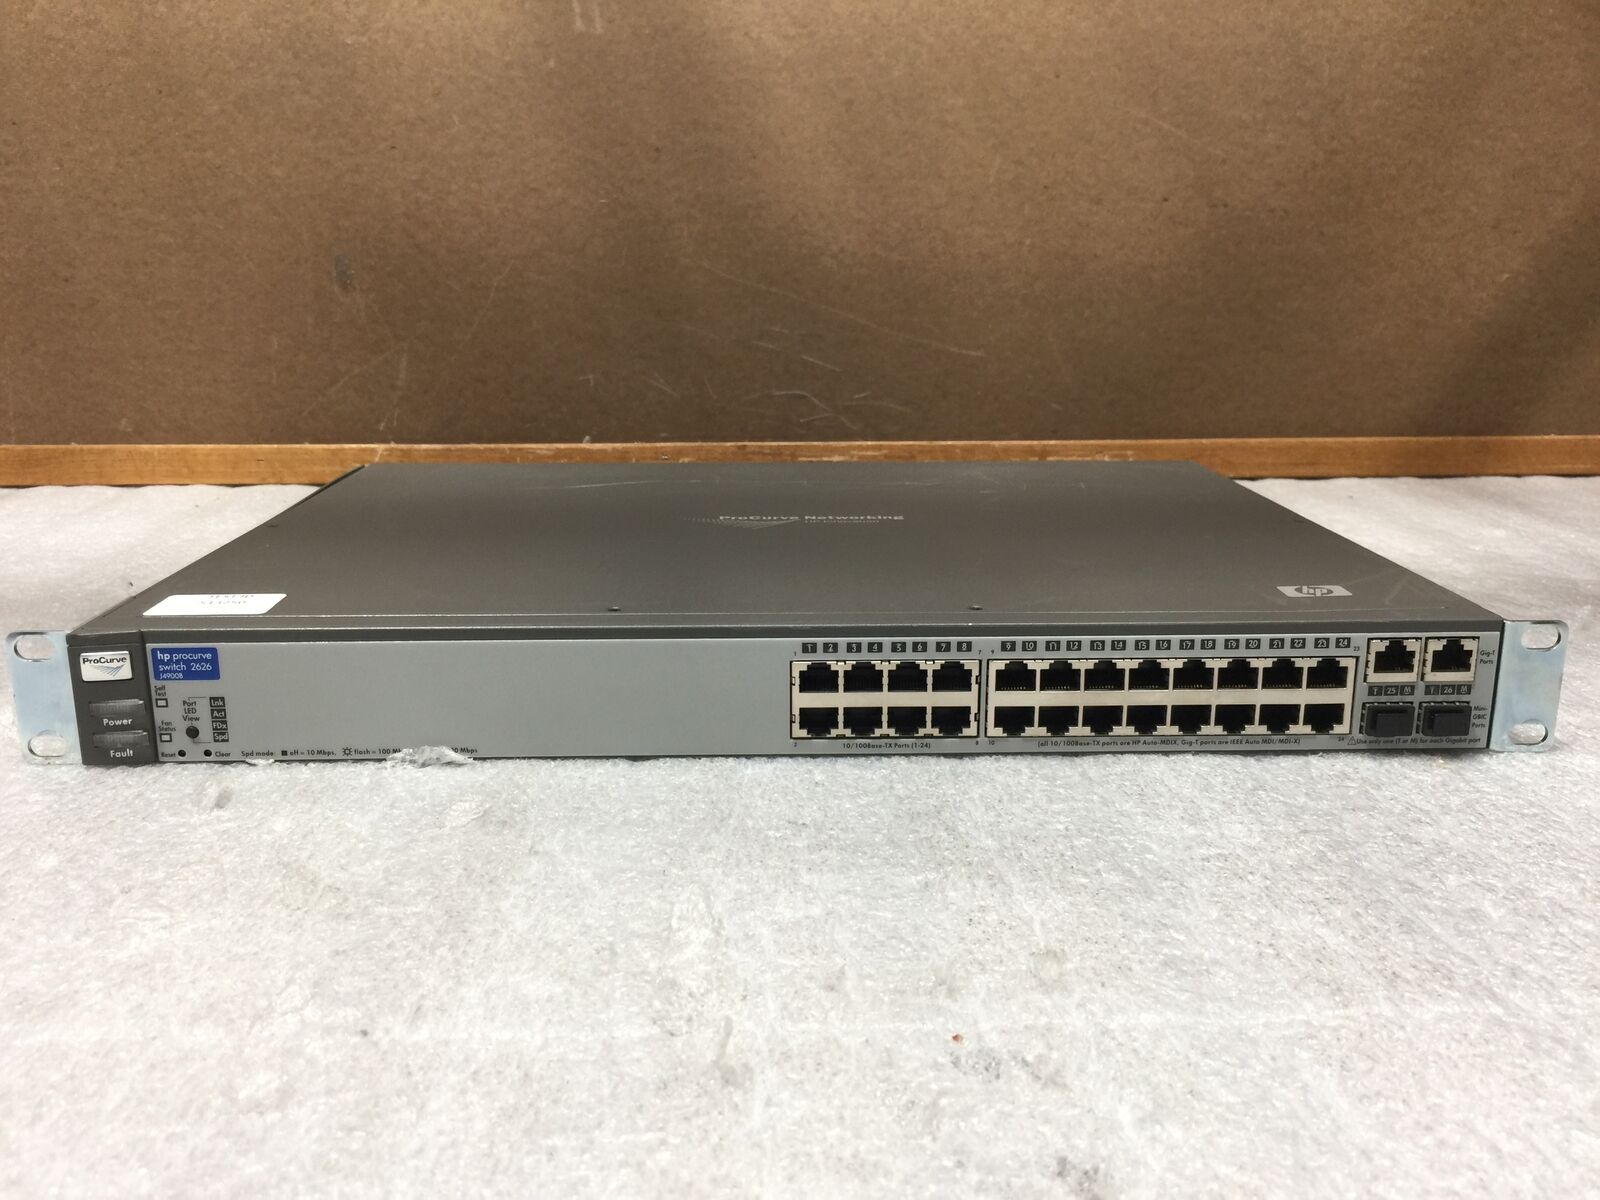 HP ProCurve 24-Port Networking Switch 2626 J49008, Tested/Working/Factory Reset